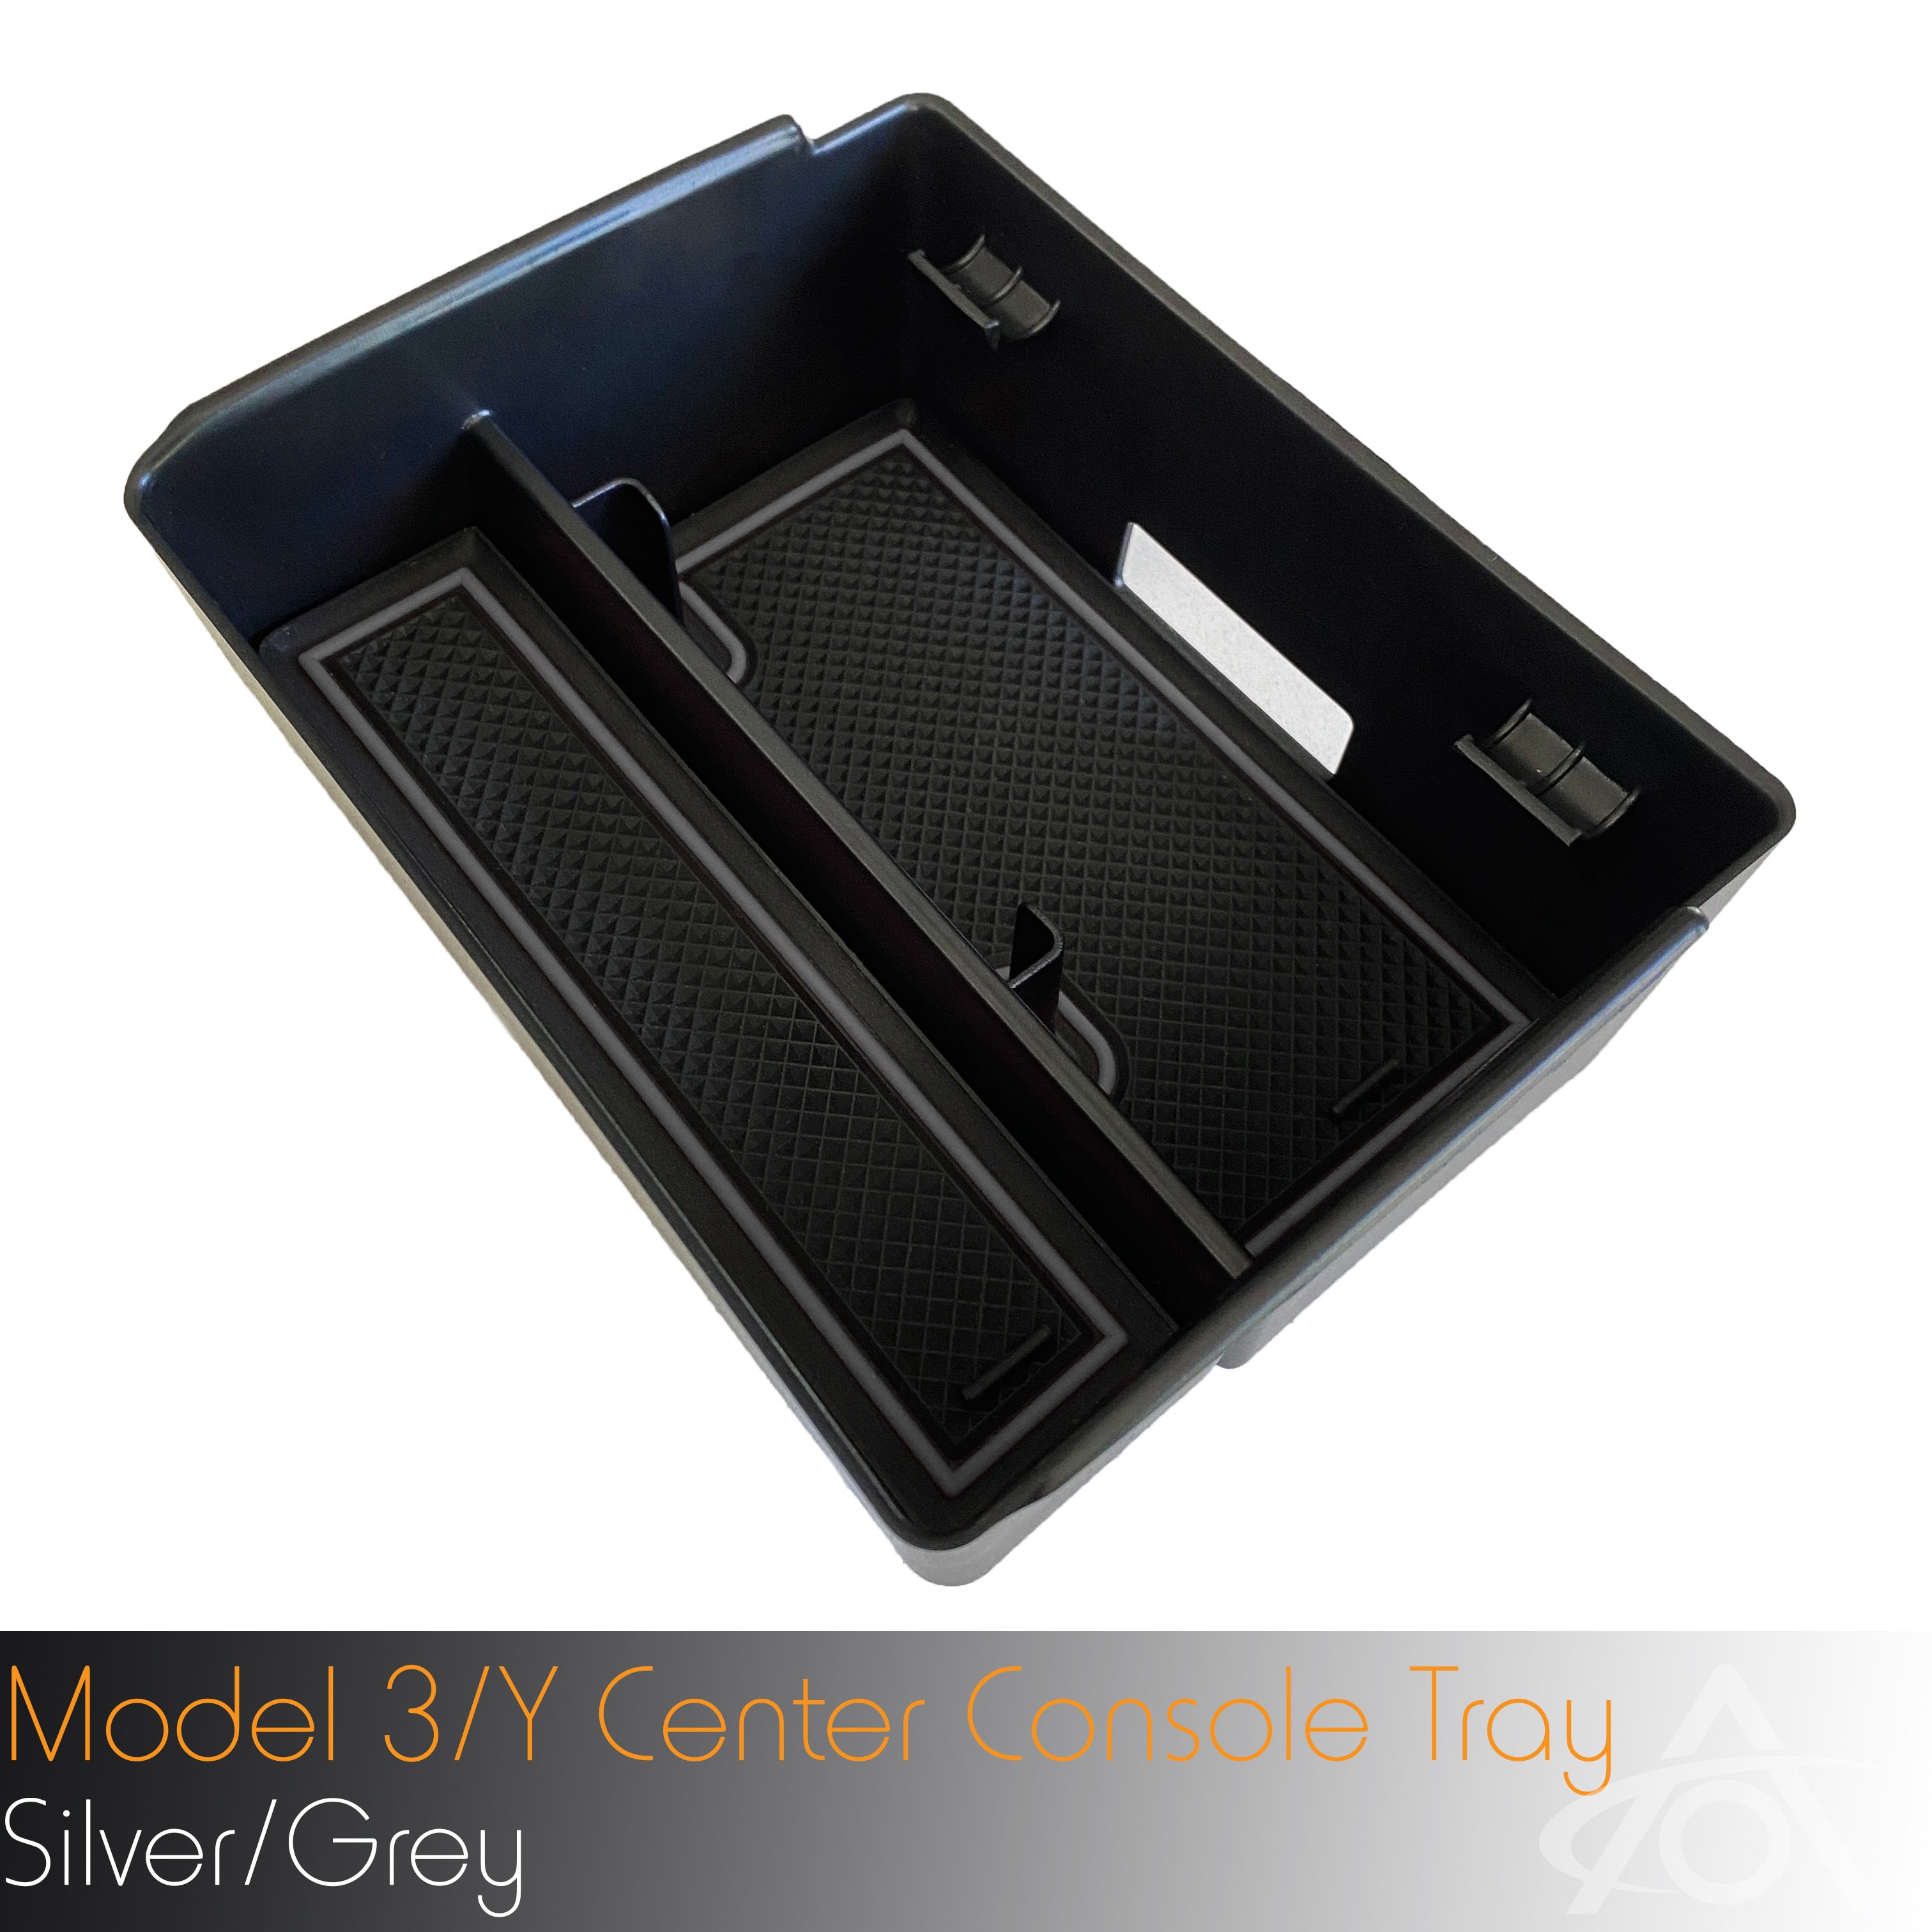 Center Console Tray for Model 3 & Y (Gen 1 Center Console)